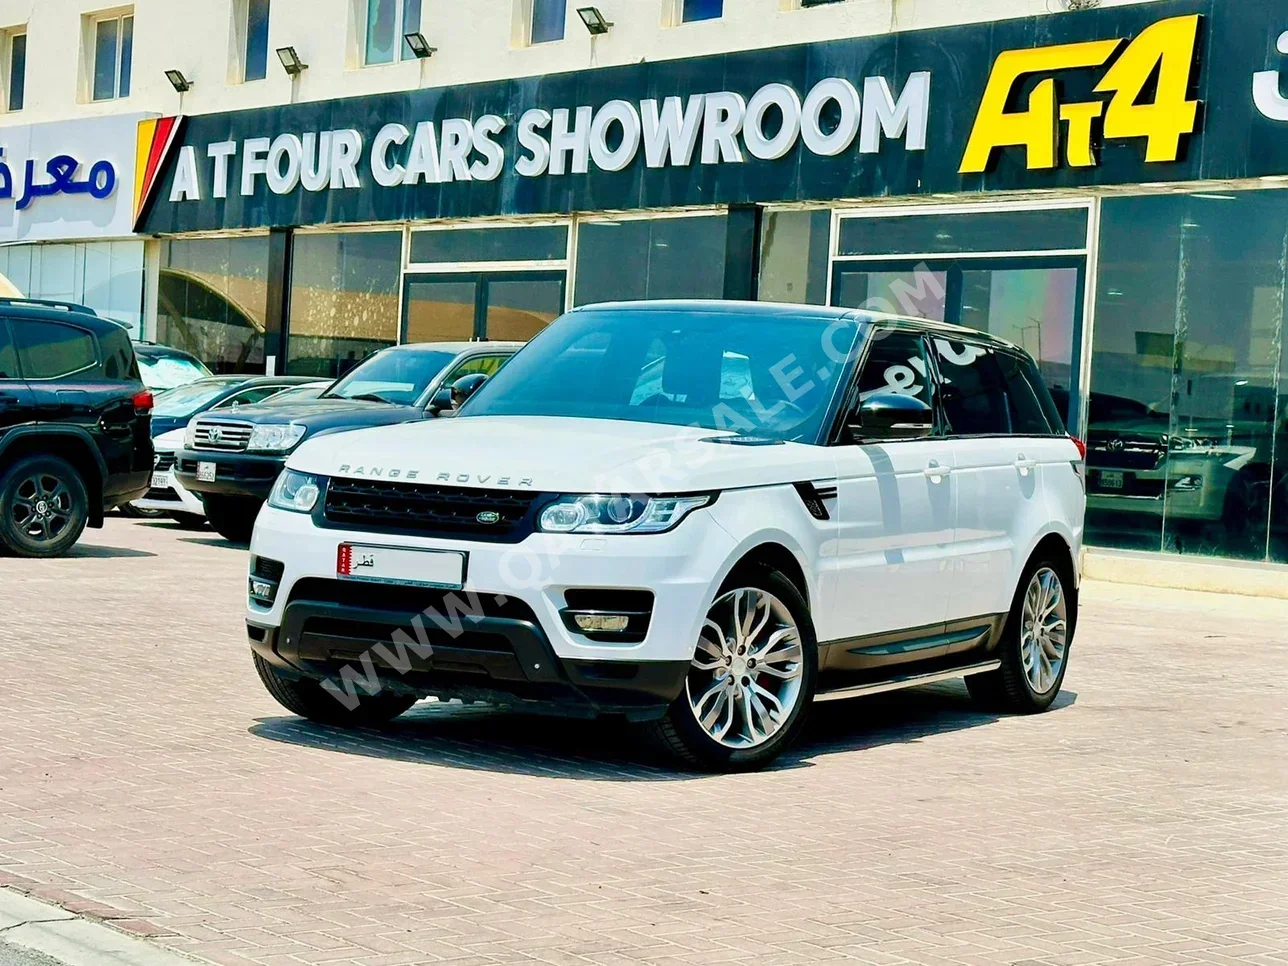 Land Rover  Range Rover  Sport Super charged  2014  Automatic  79,000 Km  8 Cylinder  Four Wheel Drive (4WD)  SUV  White